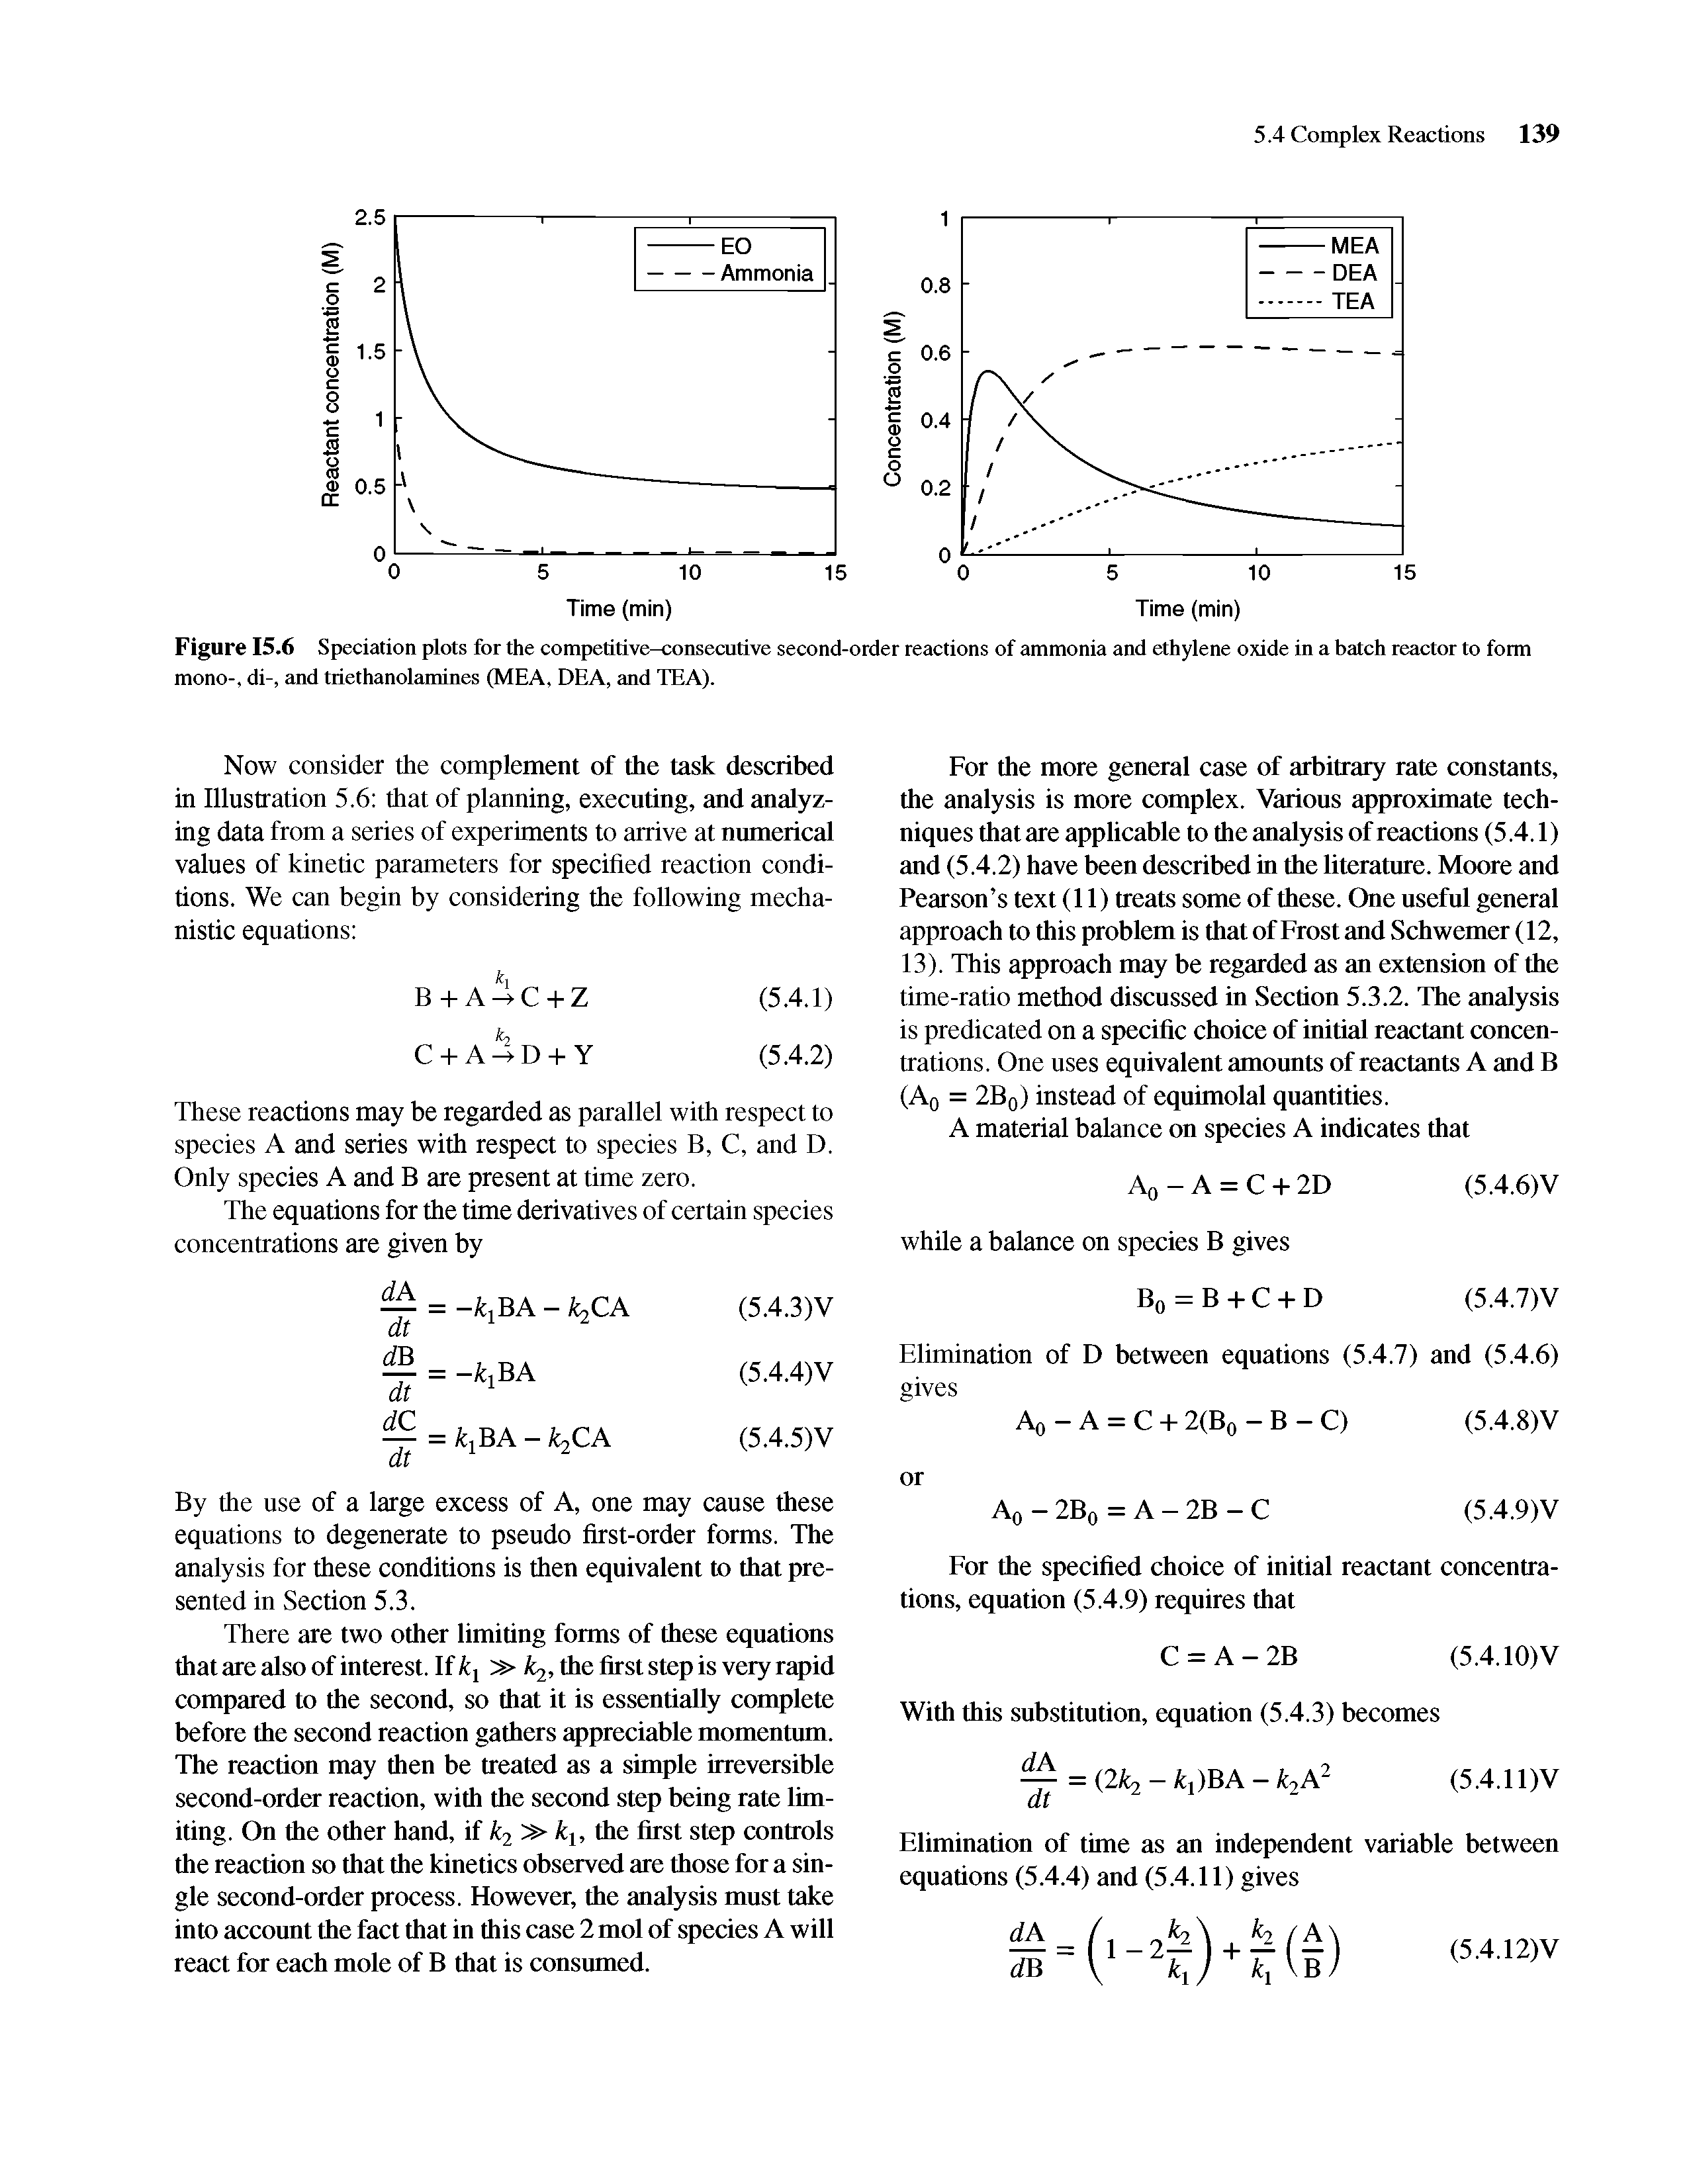 Figure 15.6 Speciation plots for the competitive-consecutive second-order reactions of ammonia and ethylene oxide in a batch reactor to form mono-, di-, and tnethanolammes (MEA, DEA, and TEA).